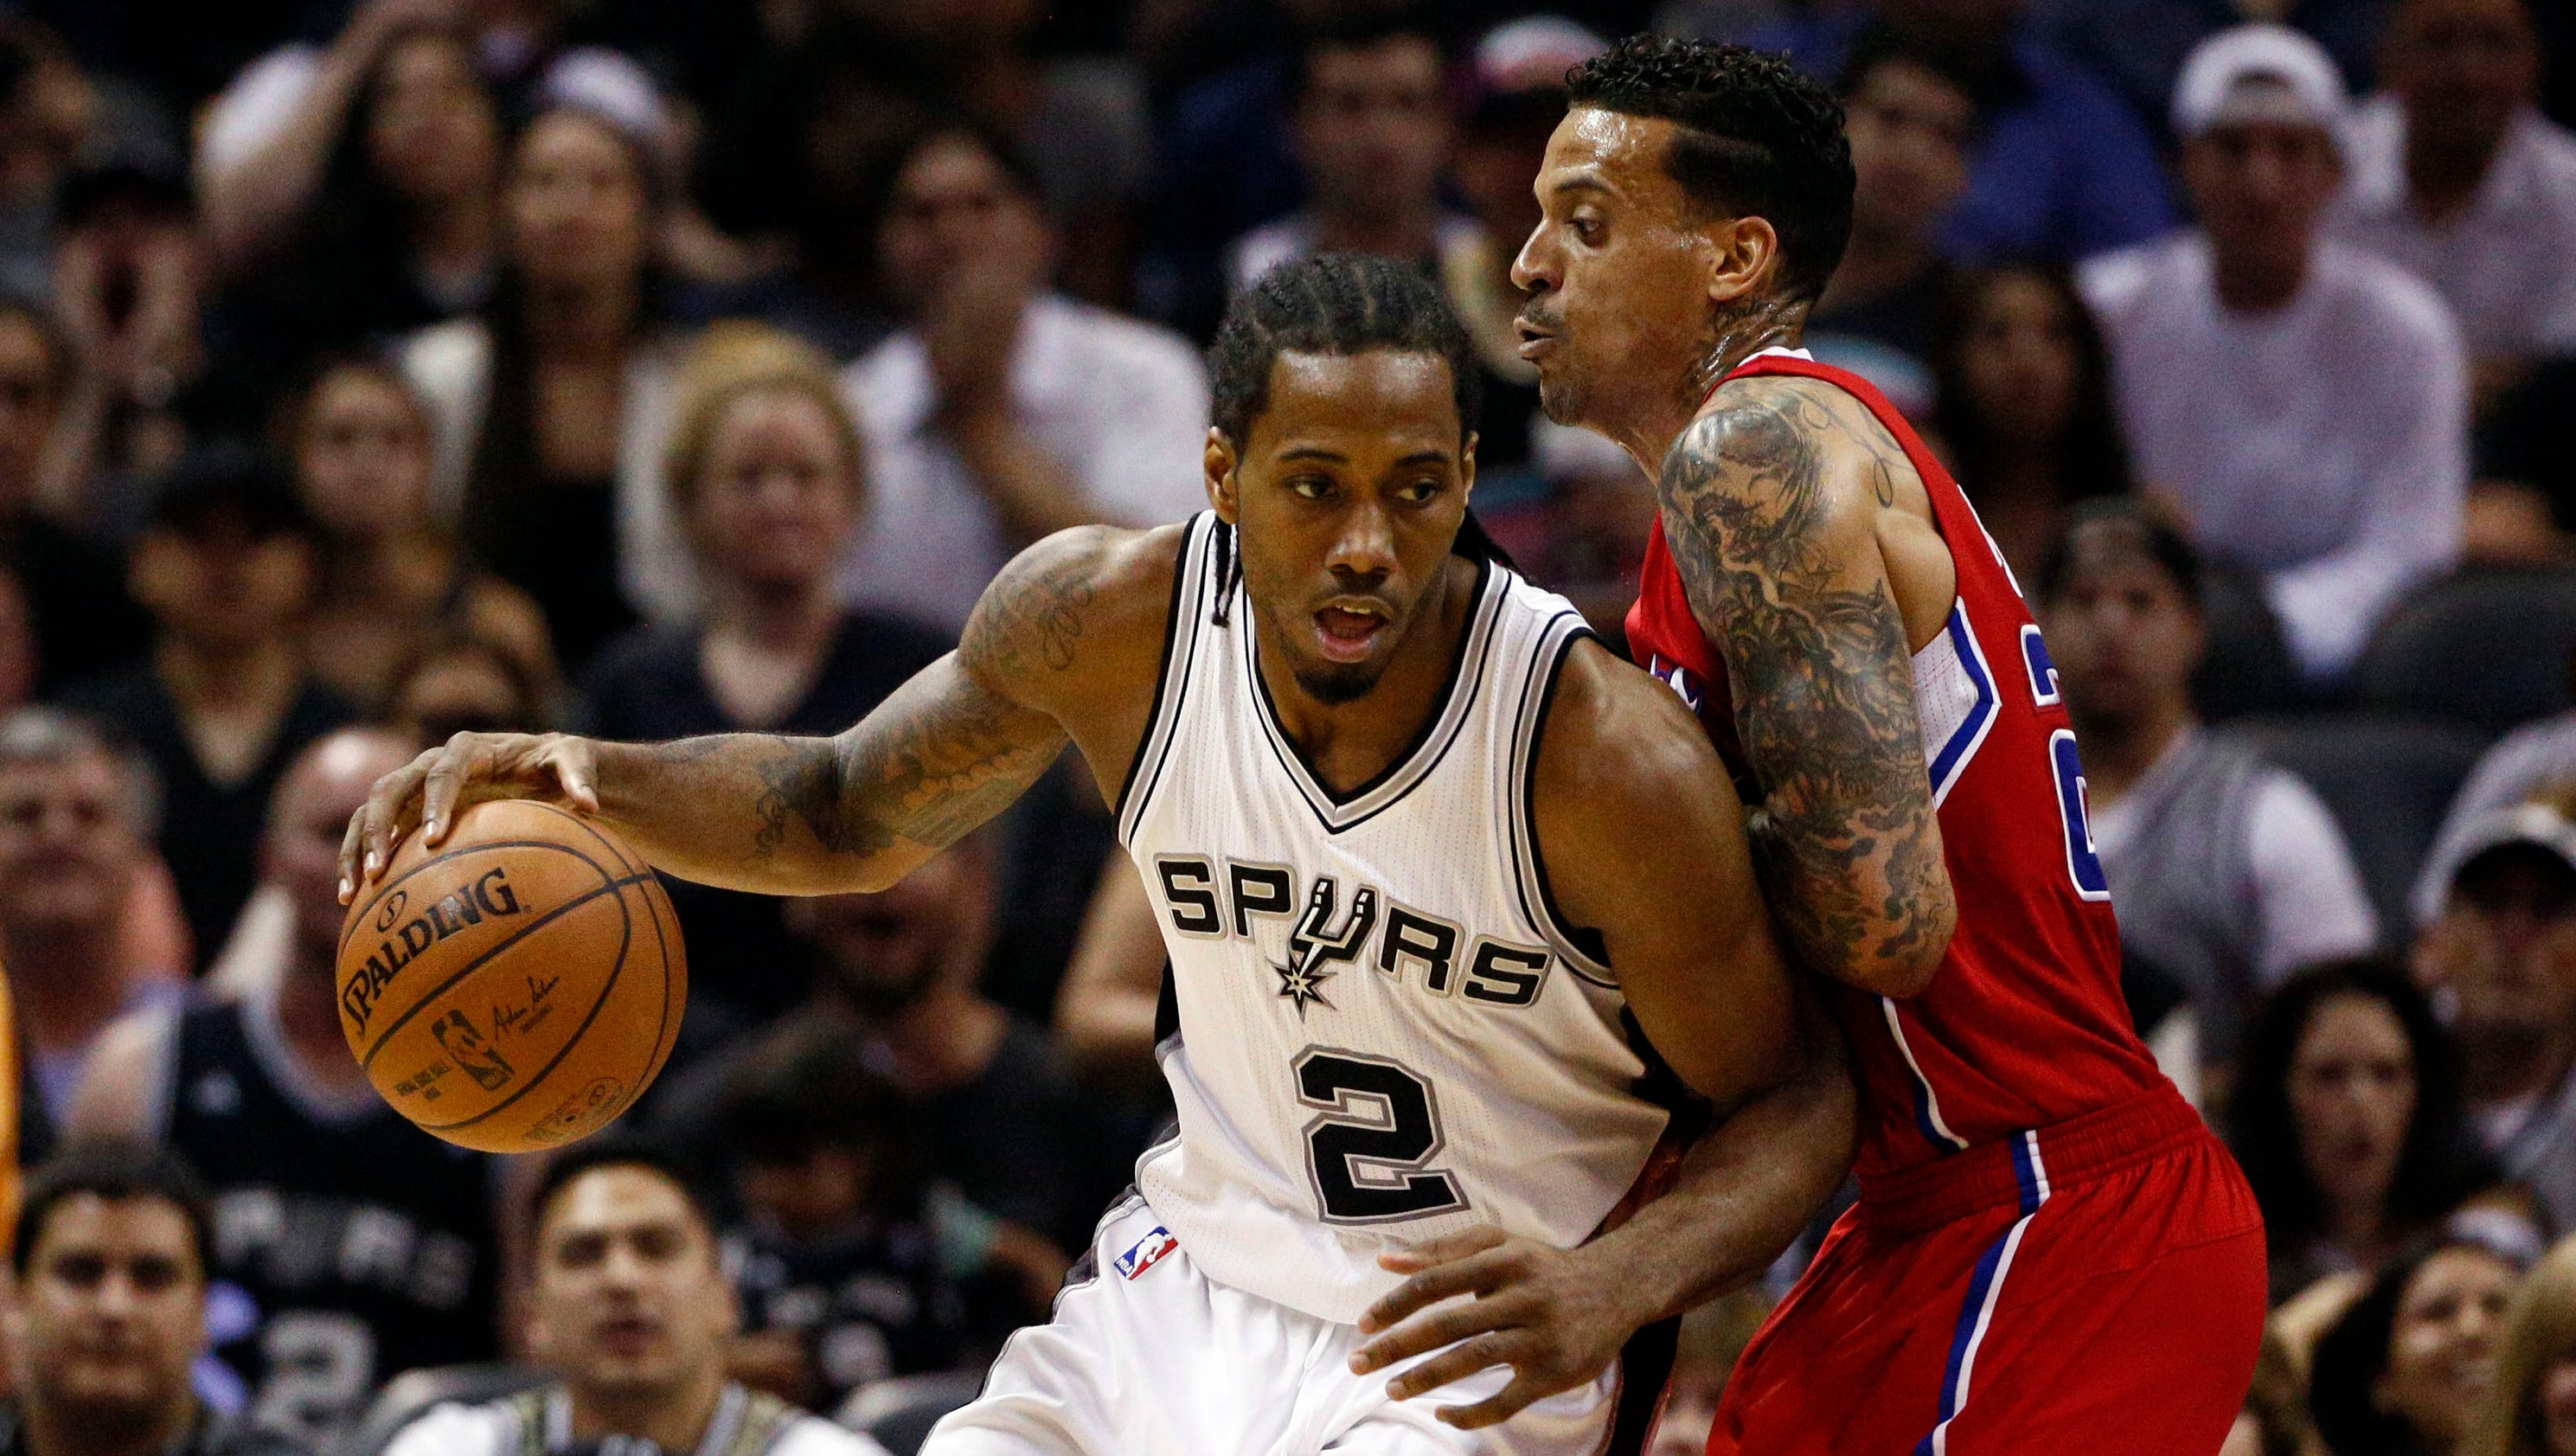 Kawhi Leonard has career-defining performance in Spurs' Game 3 rout of Clippers3200 x 1680